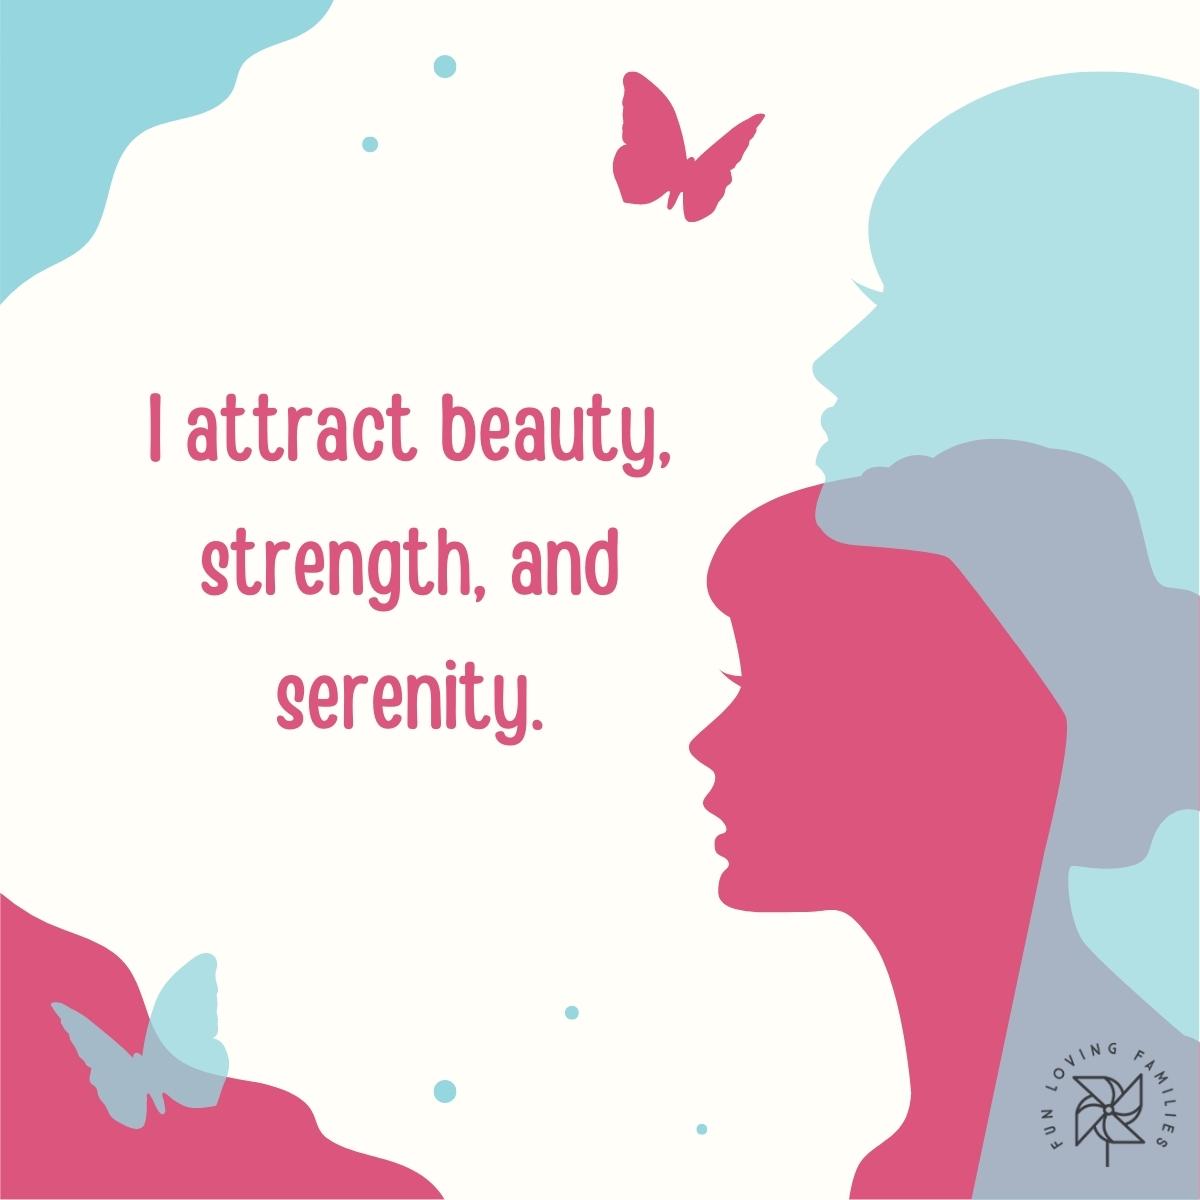 I attract beauty, strength, and serenity affirmation